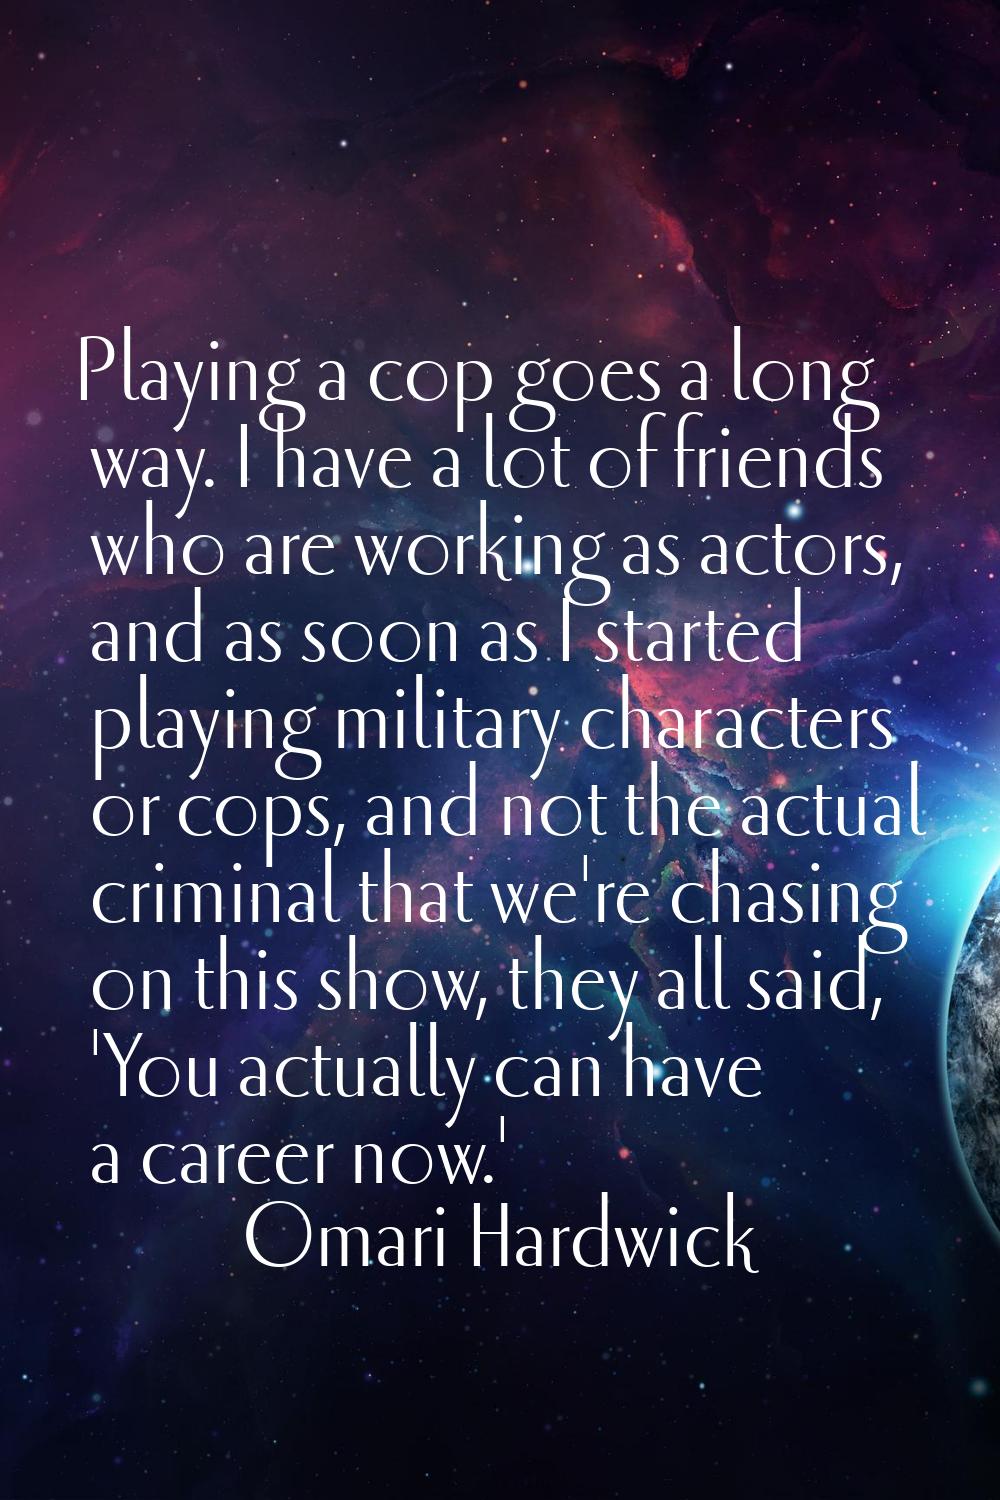 Playing a cop goes a long way. I have a lot of friends who are working as actors, and as soon as I 